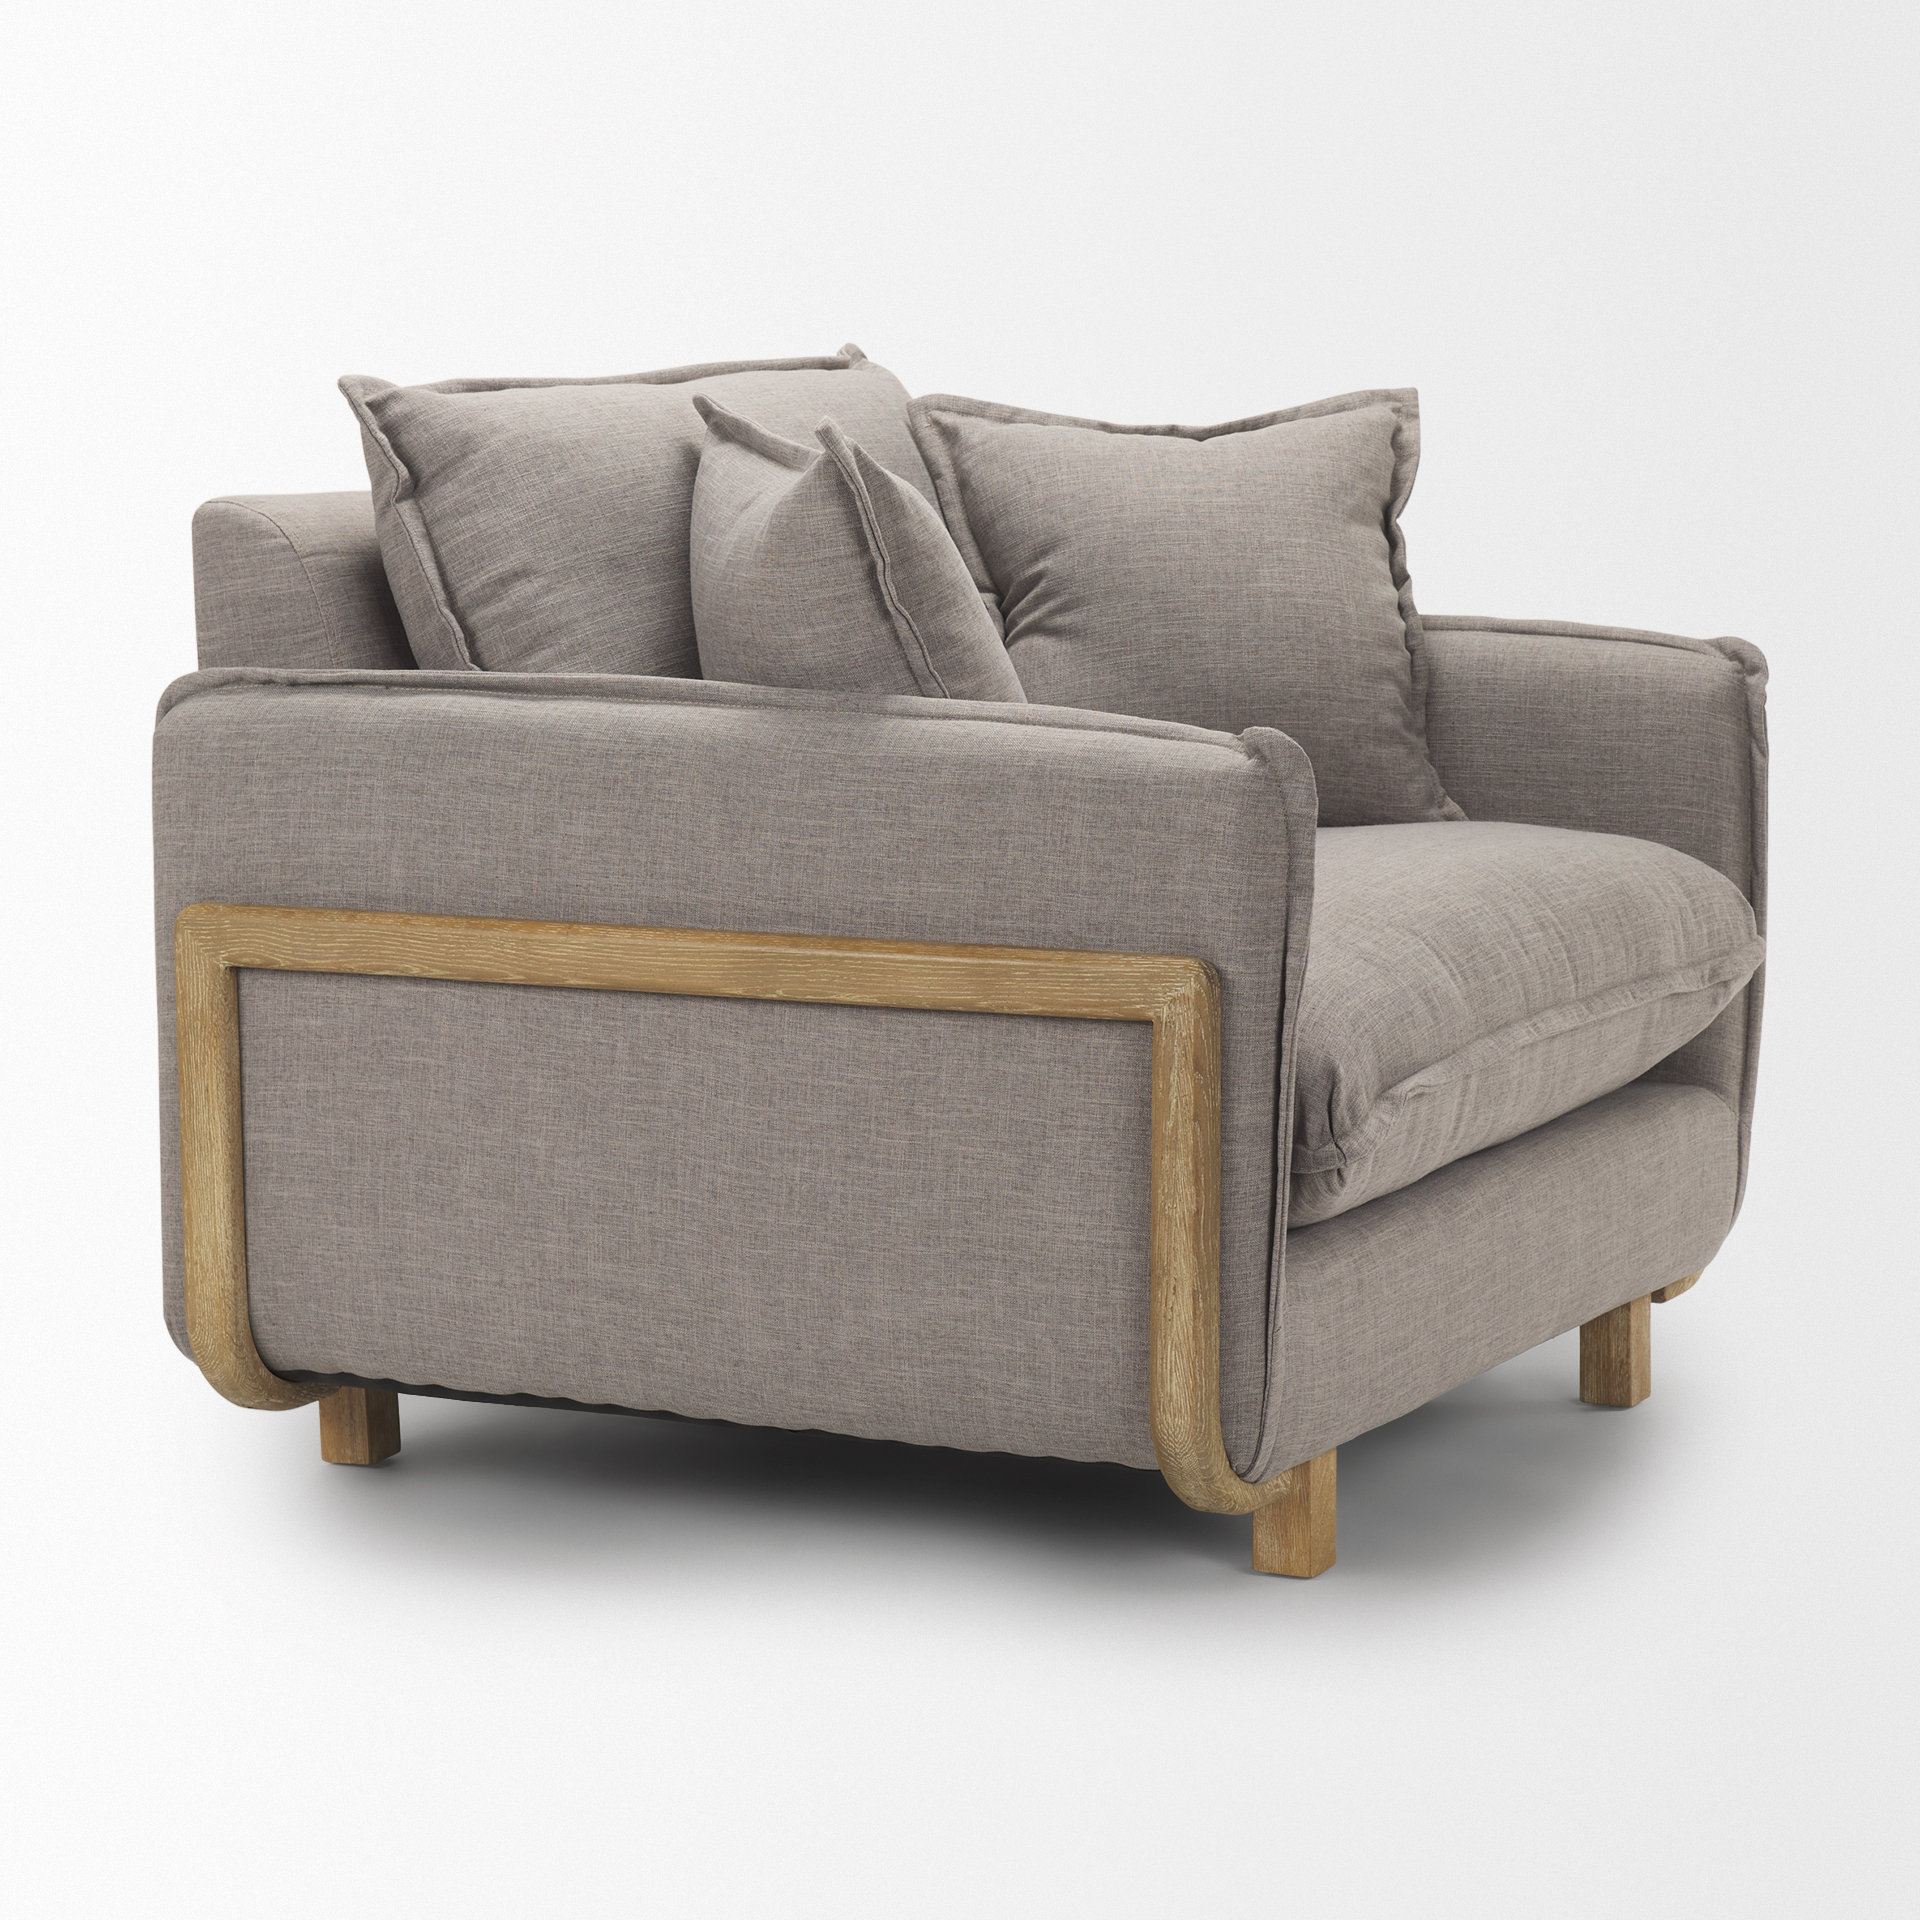 Wayfair Bruceville Club Chair | Union Reviews & Rustic Upholstered